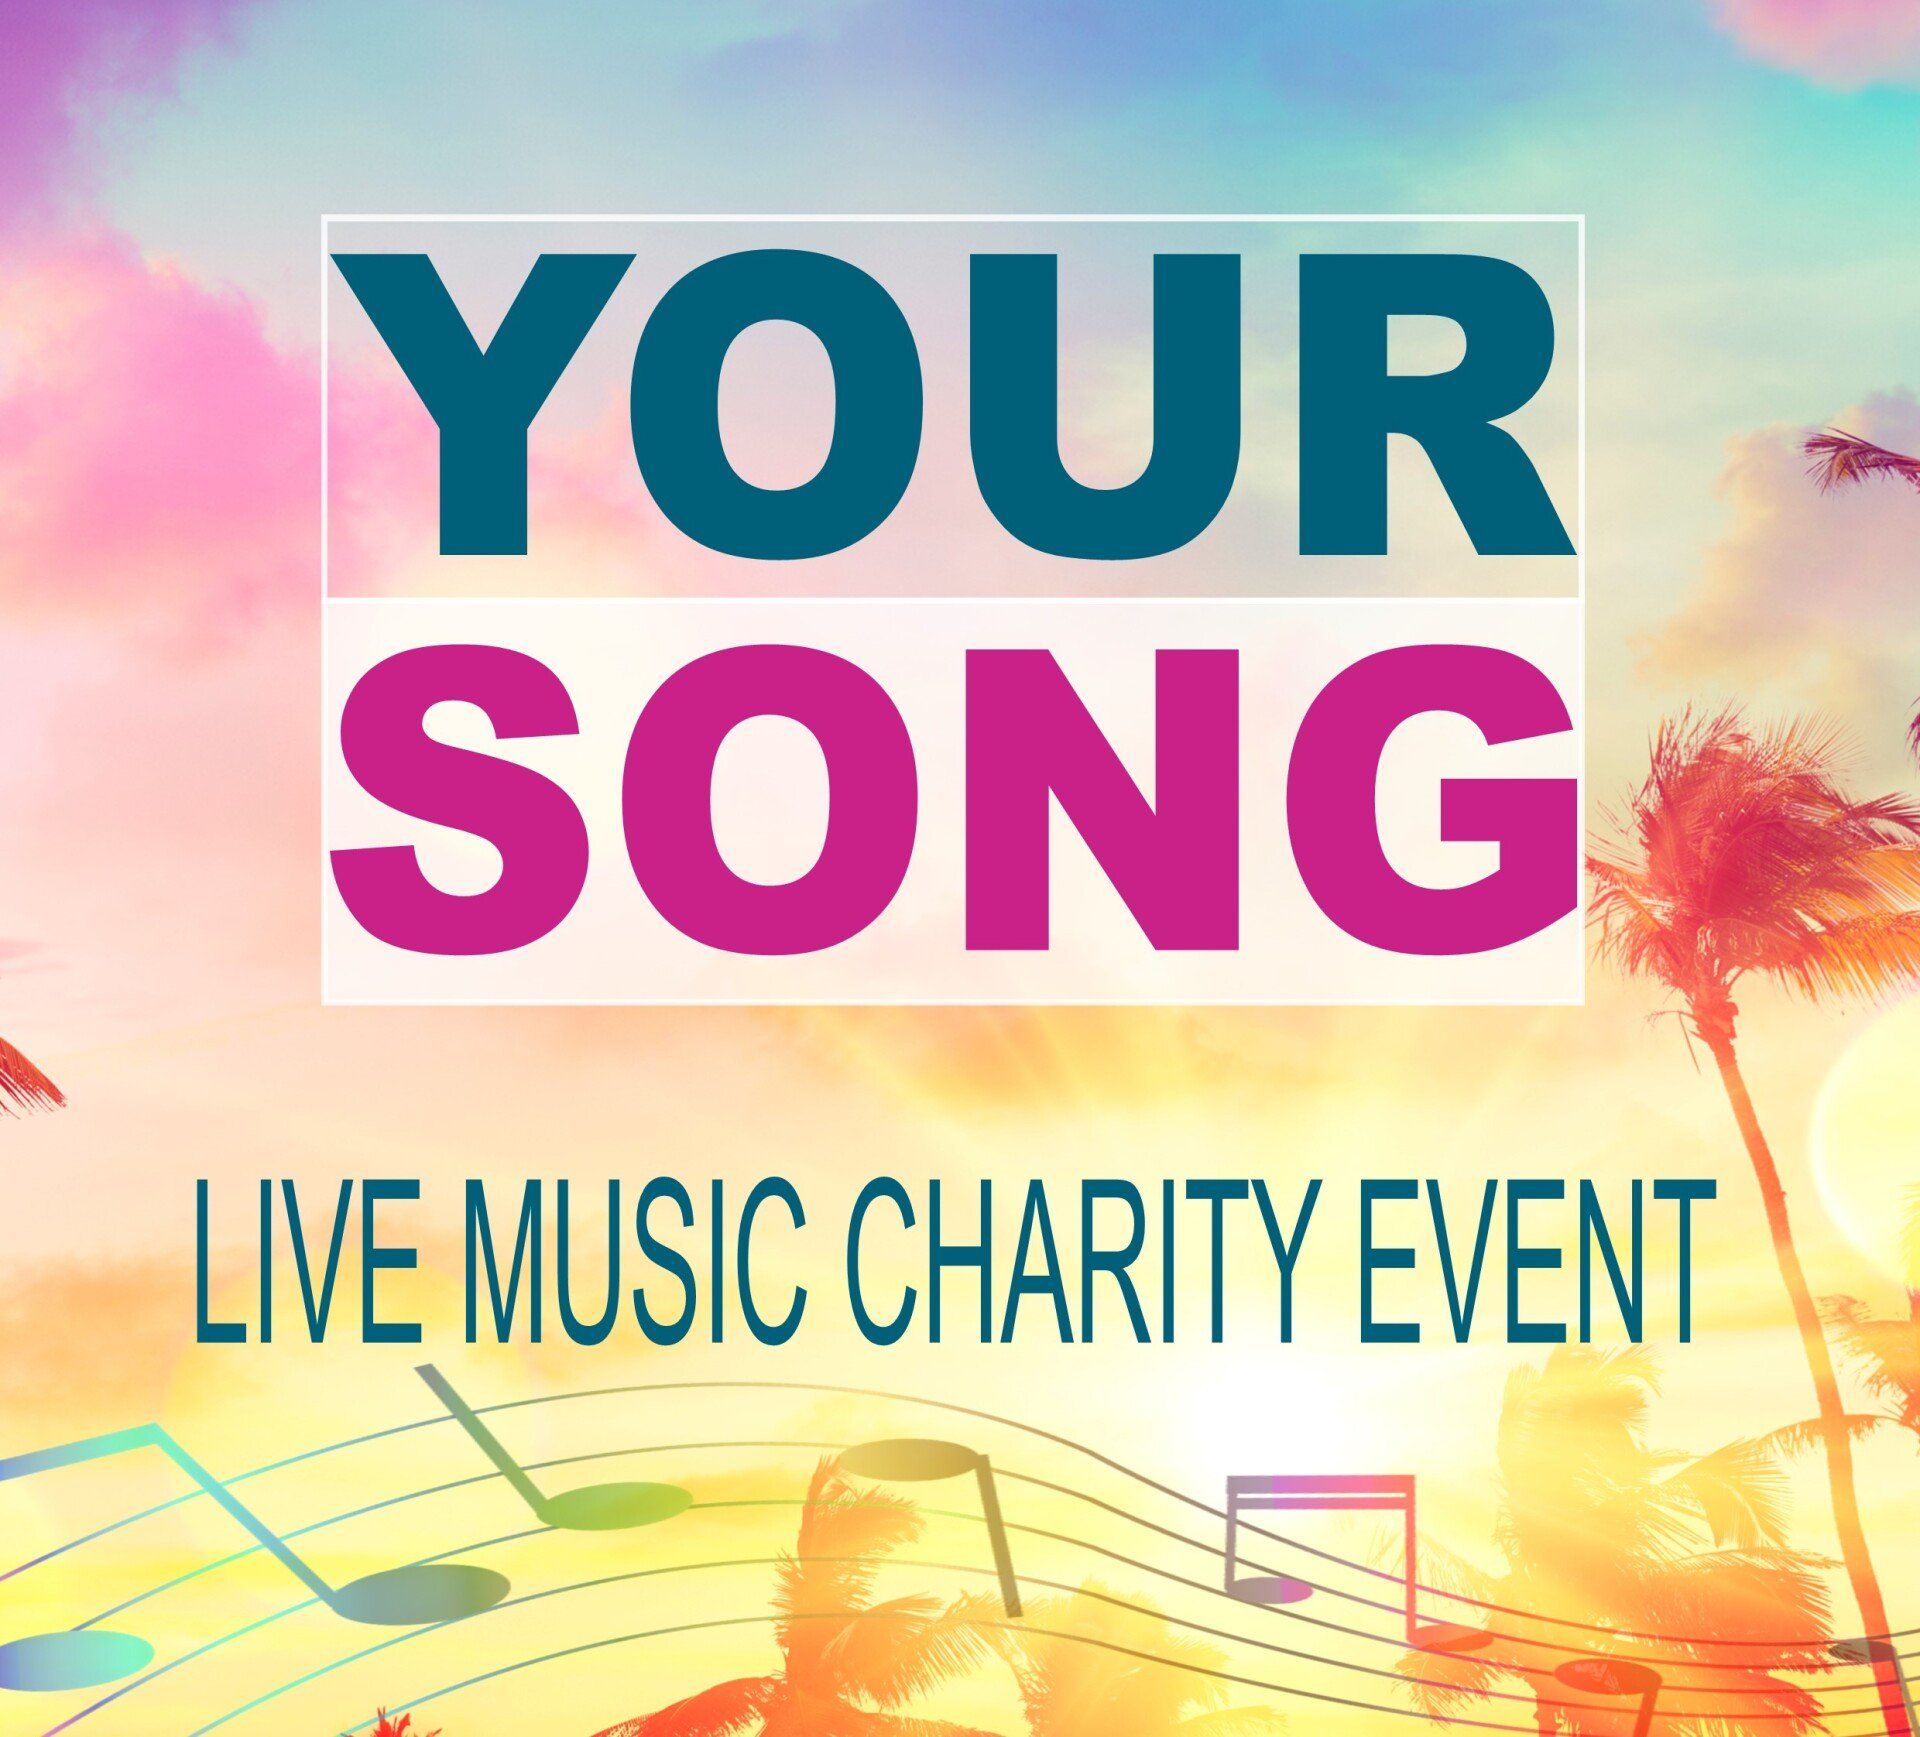 A poster for a live music charity event called your song